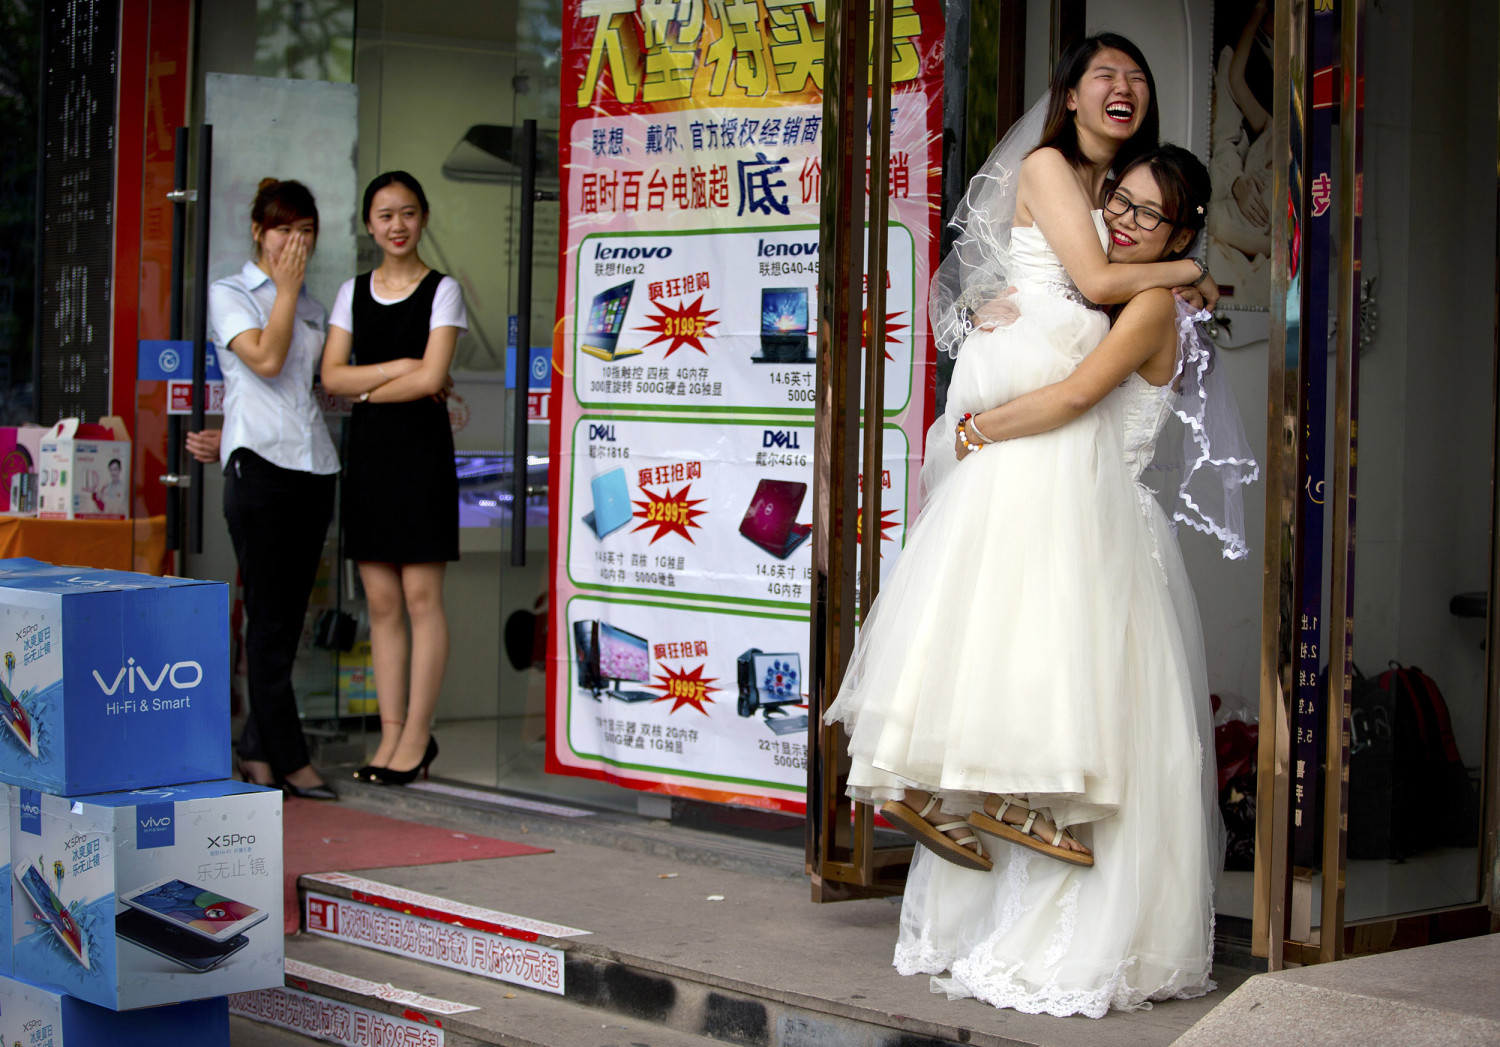 Why is China raising the prospect of same-sex marriage? picture pic